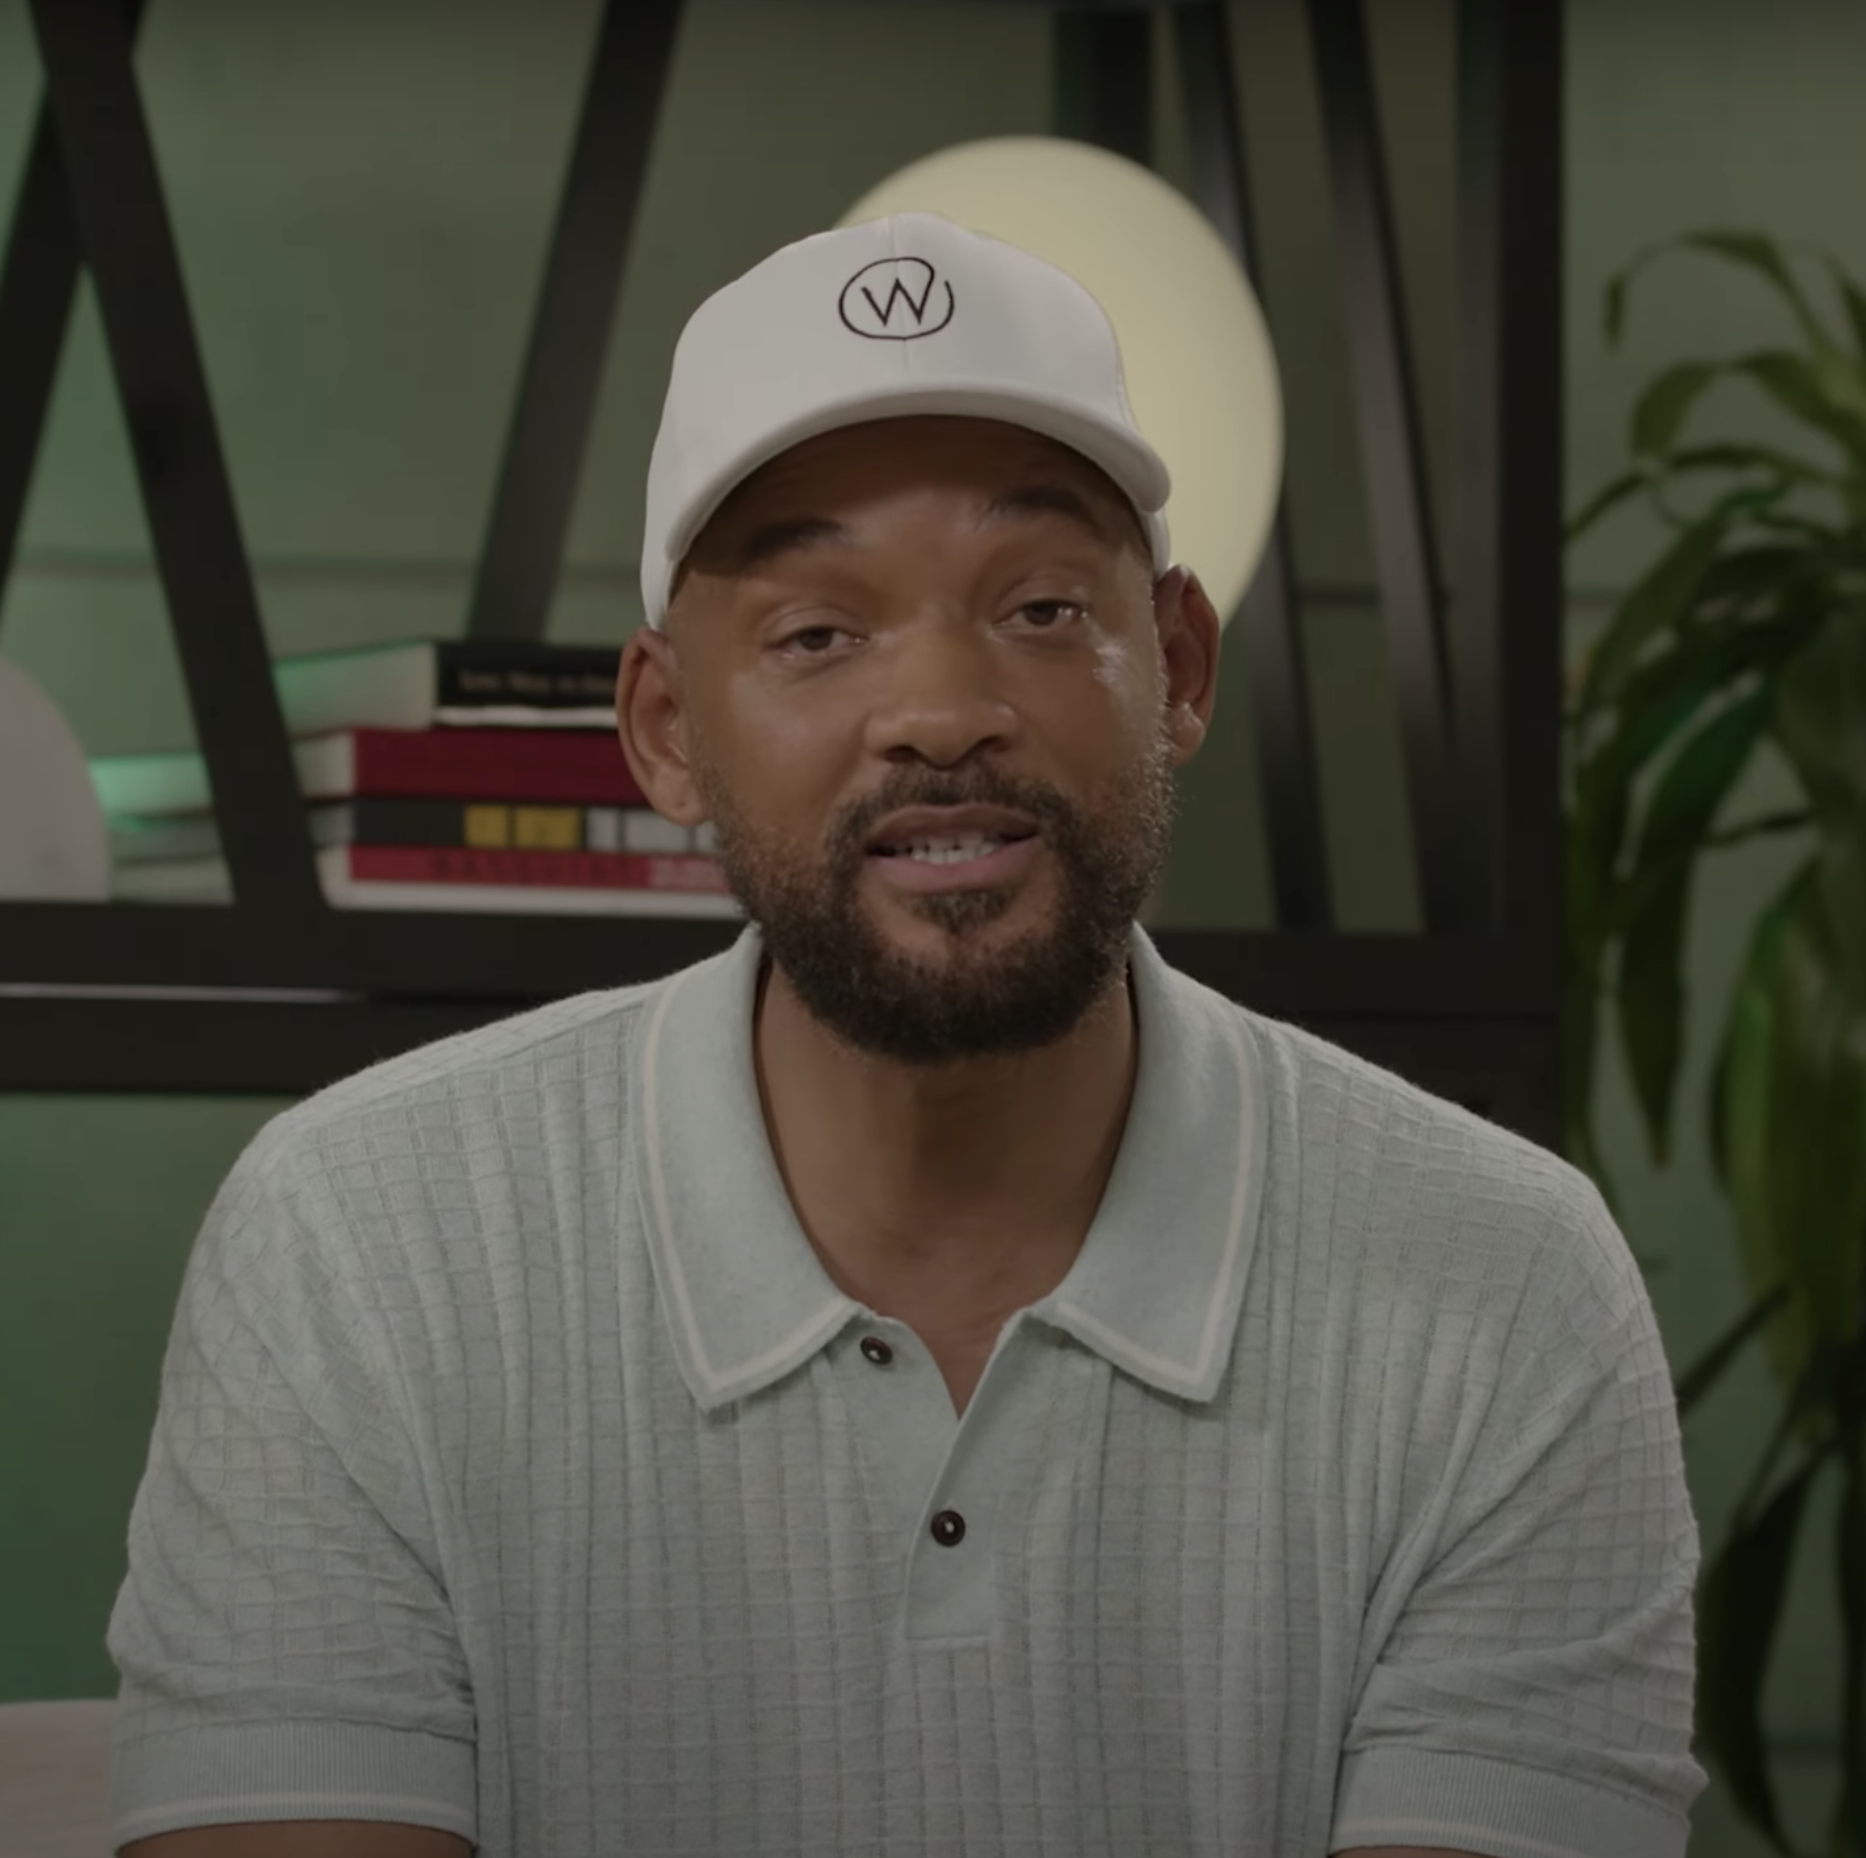 The Will Smith Apology Video is Here And It's Weirder Than We Expected